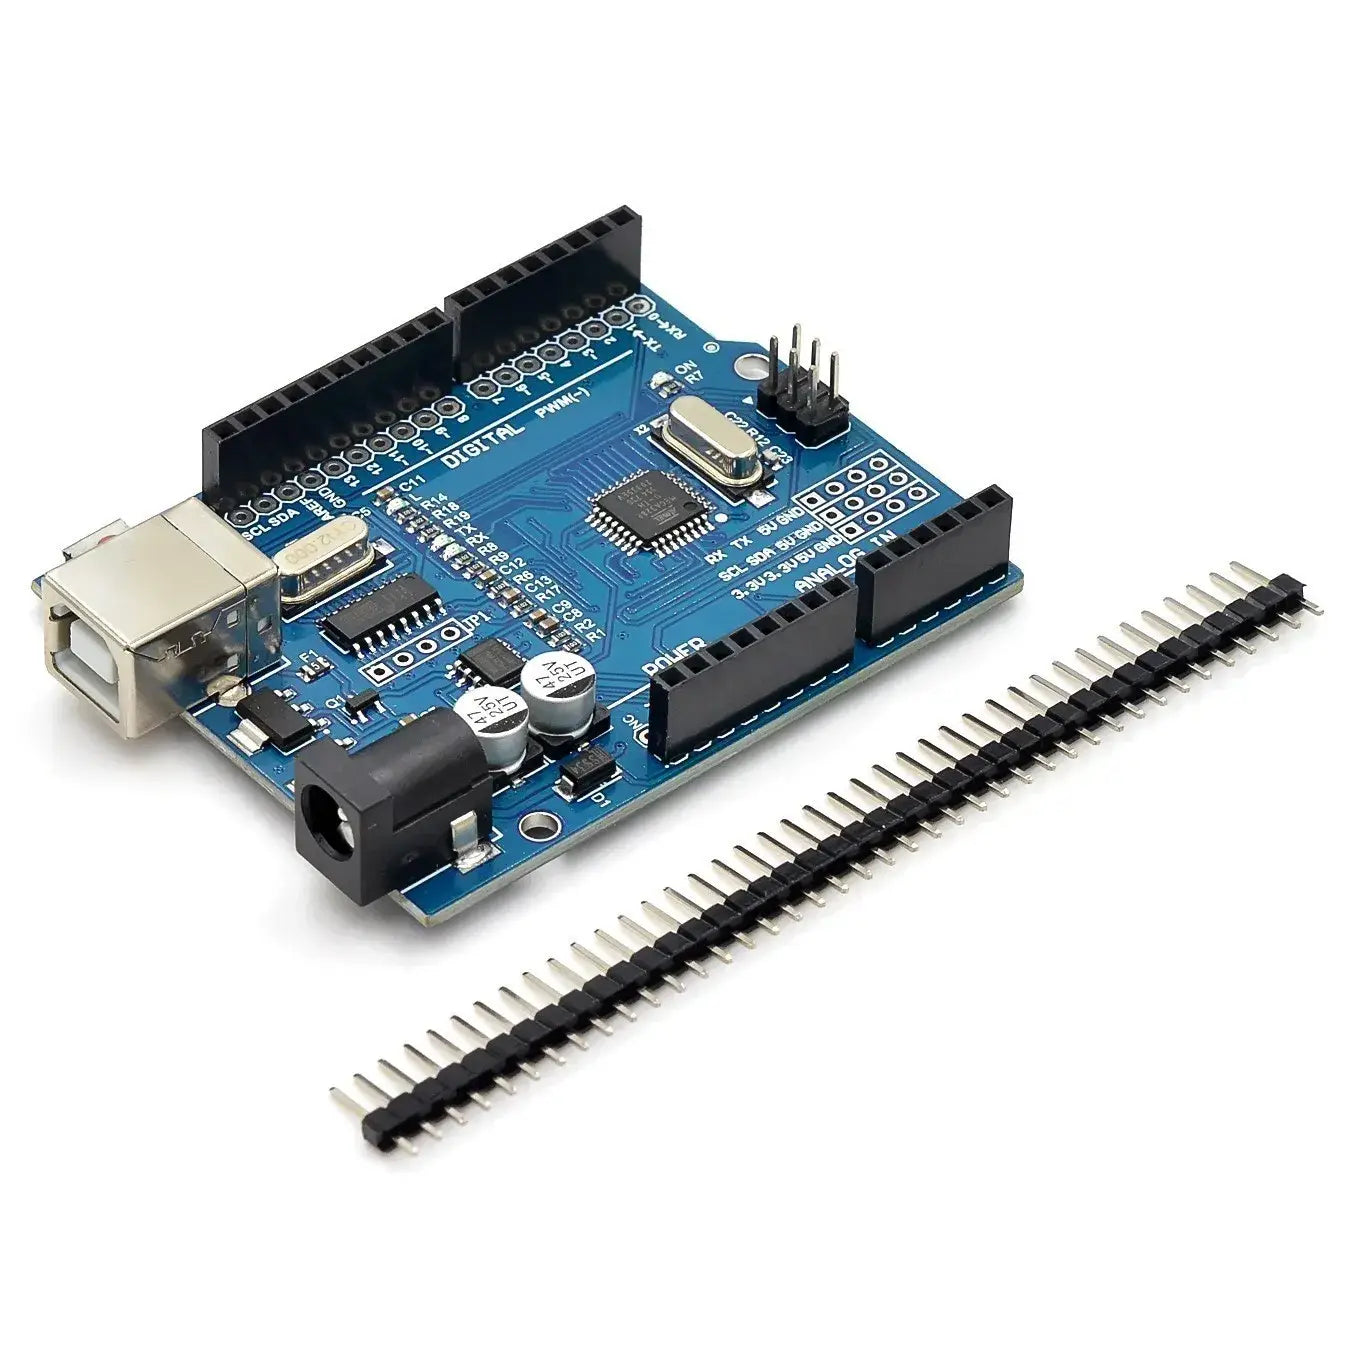 Arduino Uno With USB Cable SMD